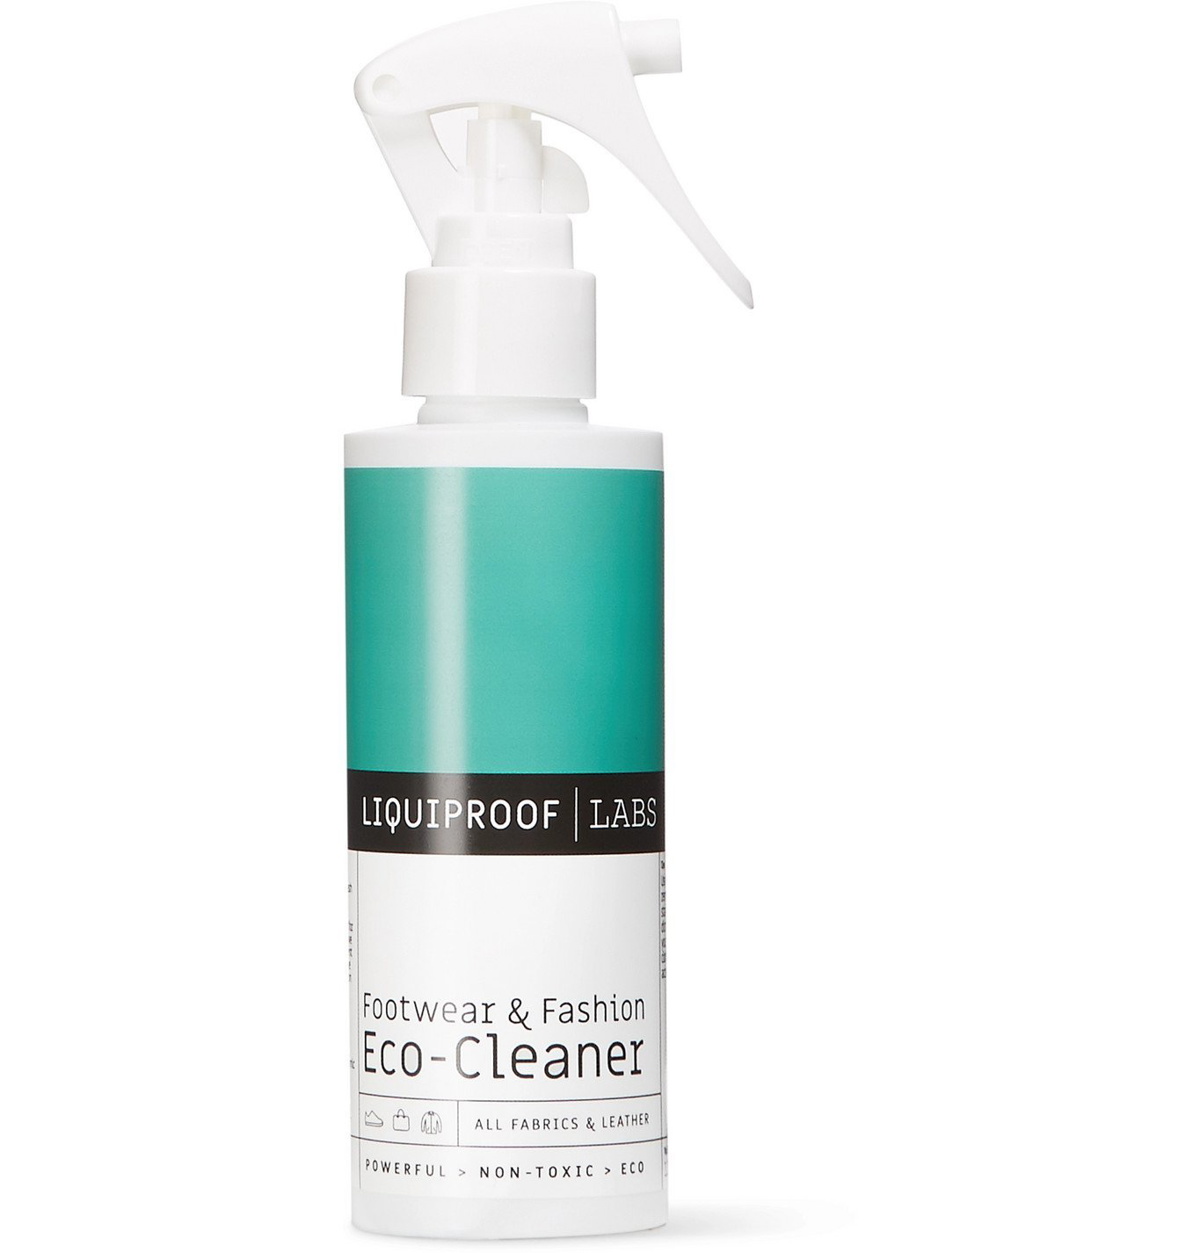 Photo: Liquiproof LABS - Footwear & Fashion Eco-Cleaner, 125ml - Colorless